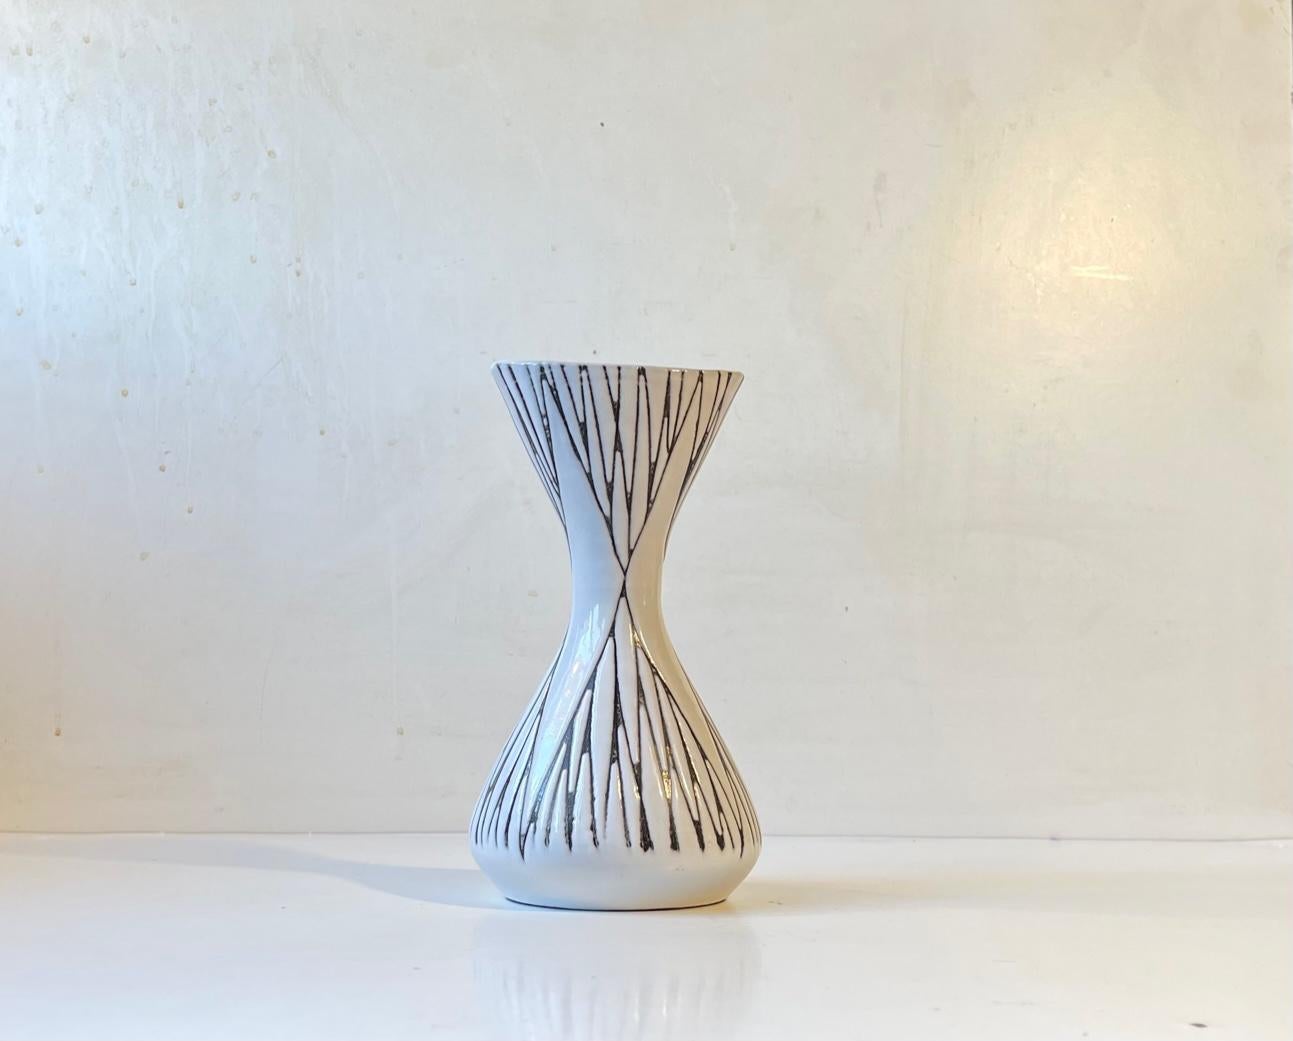 A rare hour-glass - diablo shaped vase by female ceramist Mari Simmulson.. It is called Mars and features incised lines creating a pointy geometric pattern bursting through its white main-glaze. Made Ca. 1960 at Upsala Ekeby in Sweden. Fully